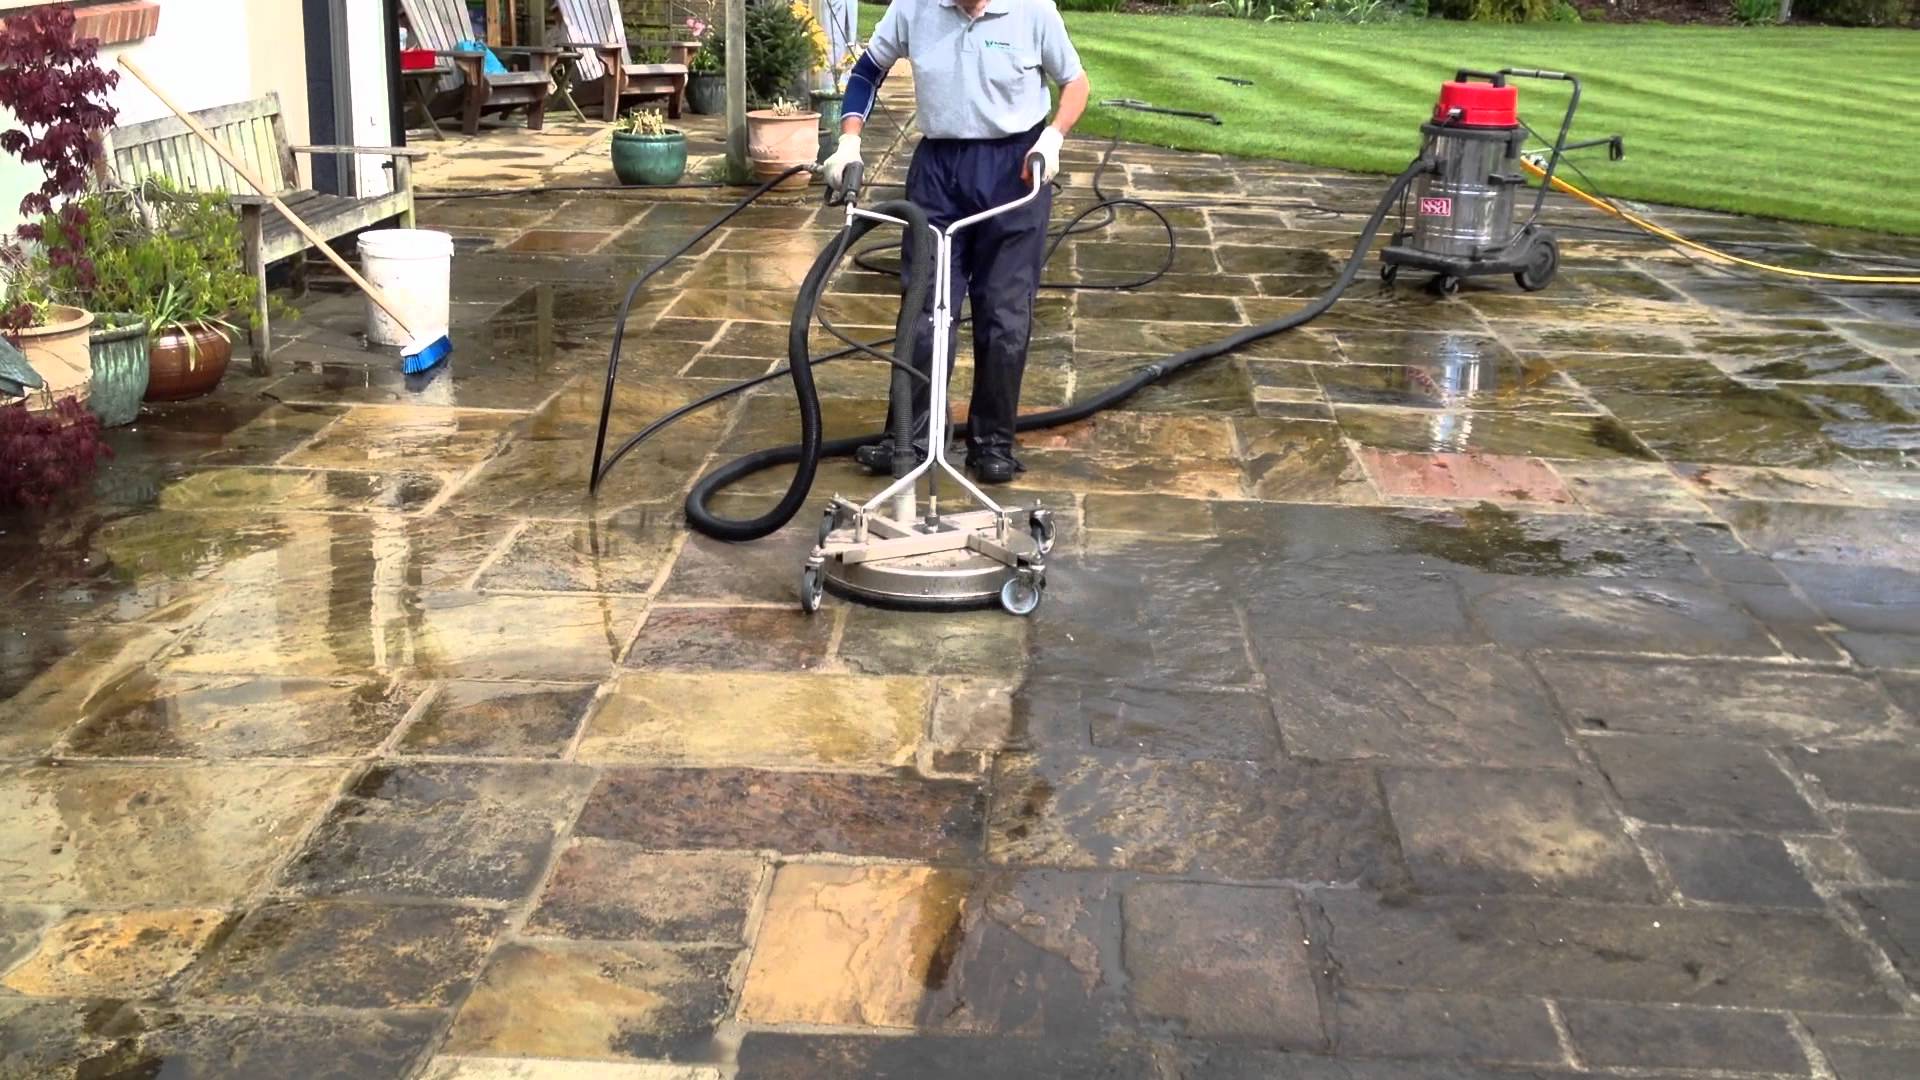 Natural Stone Patio being cleaned as part of routine ongoing maintenance of natural stone